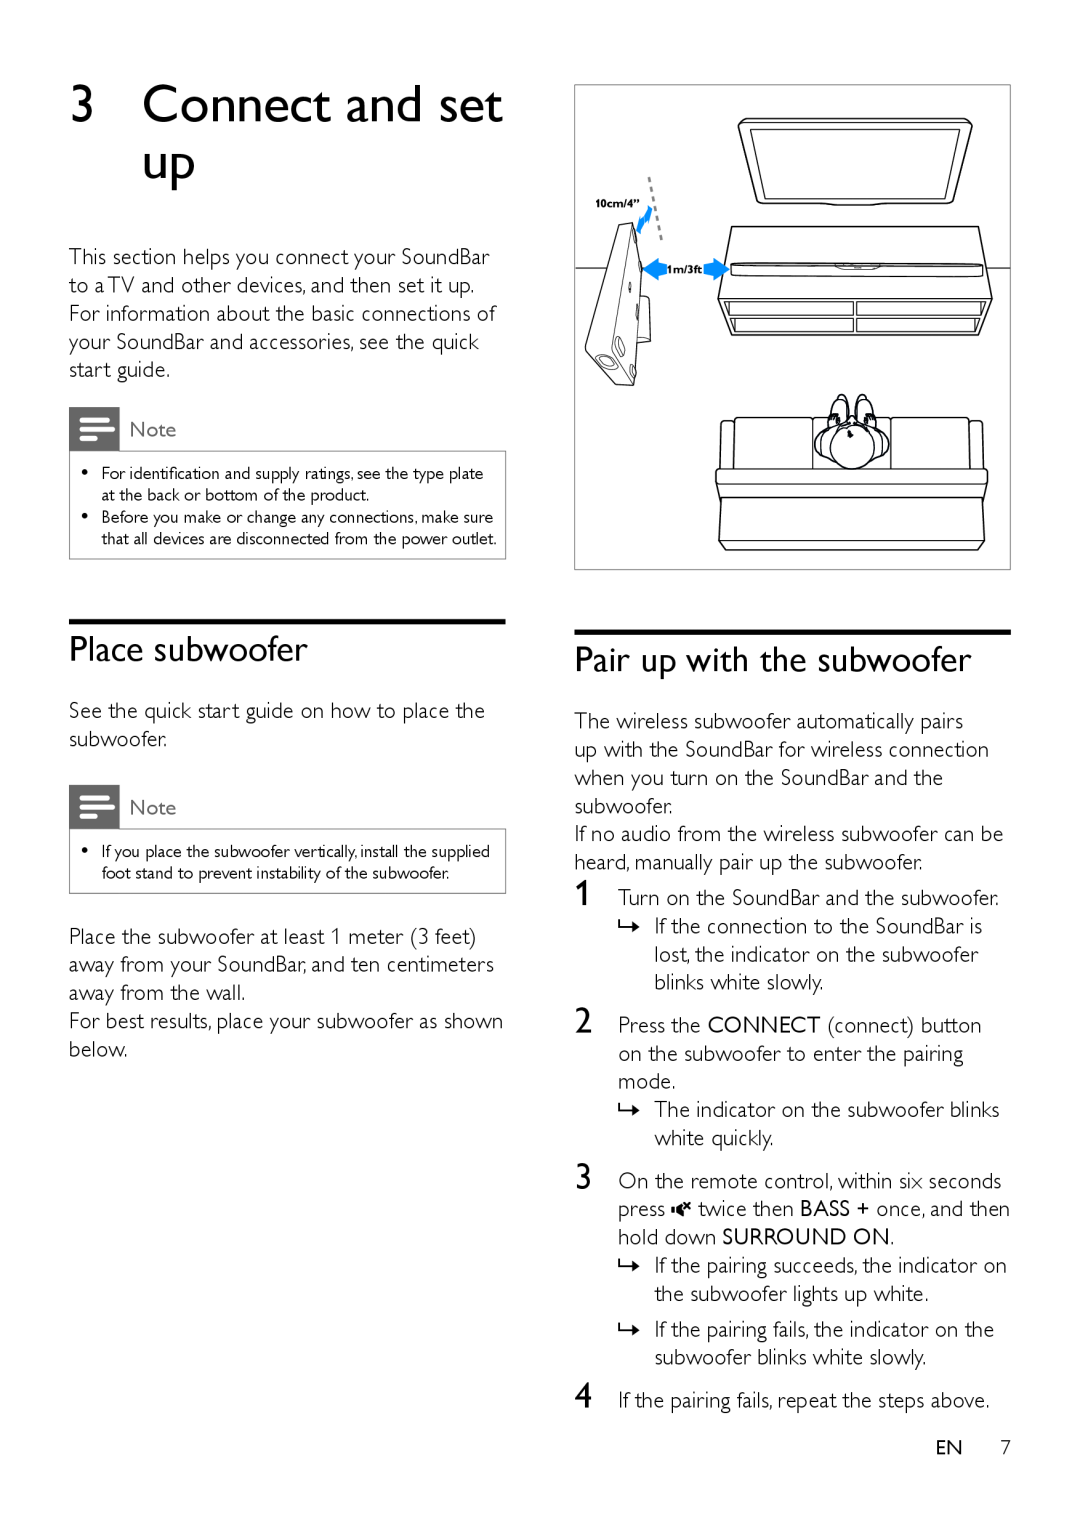 Philips HTL6145C user manual 3Connect and set up, Place subwoofer, Pair up with the subwoofer 